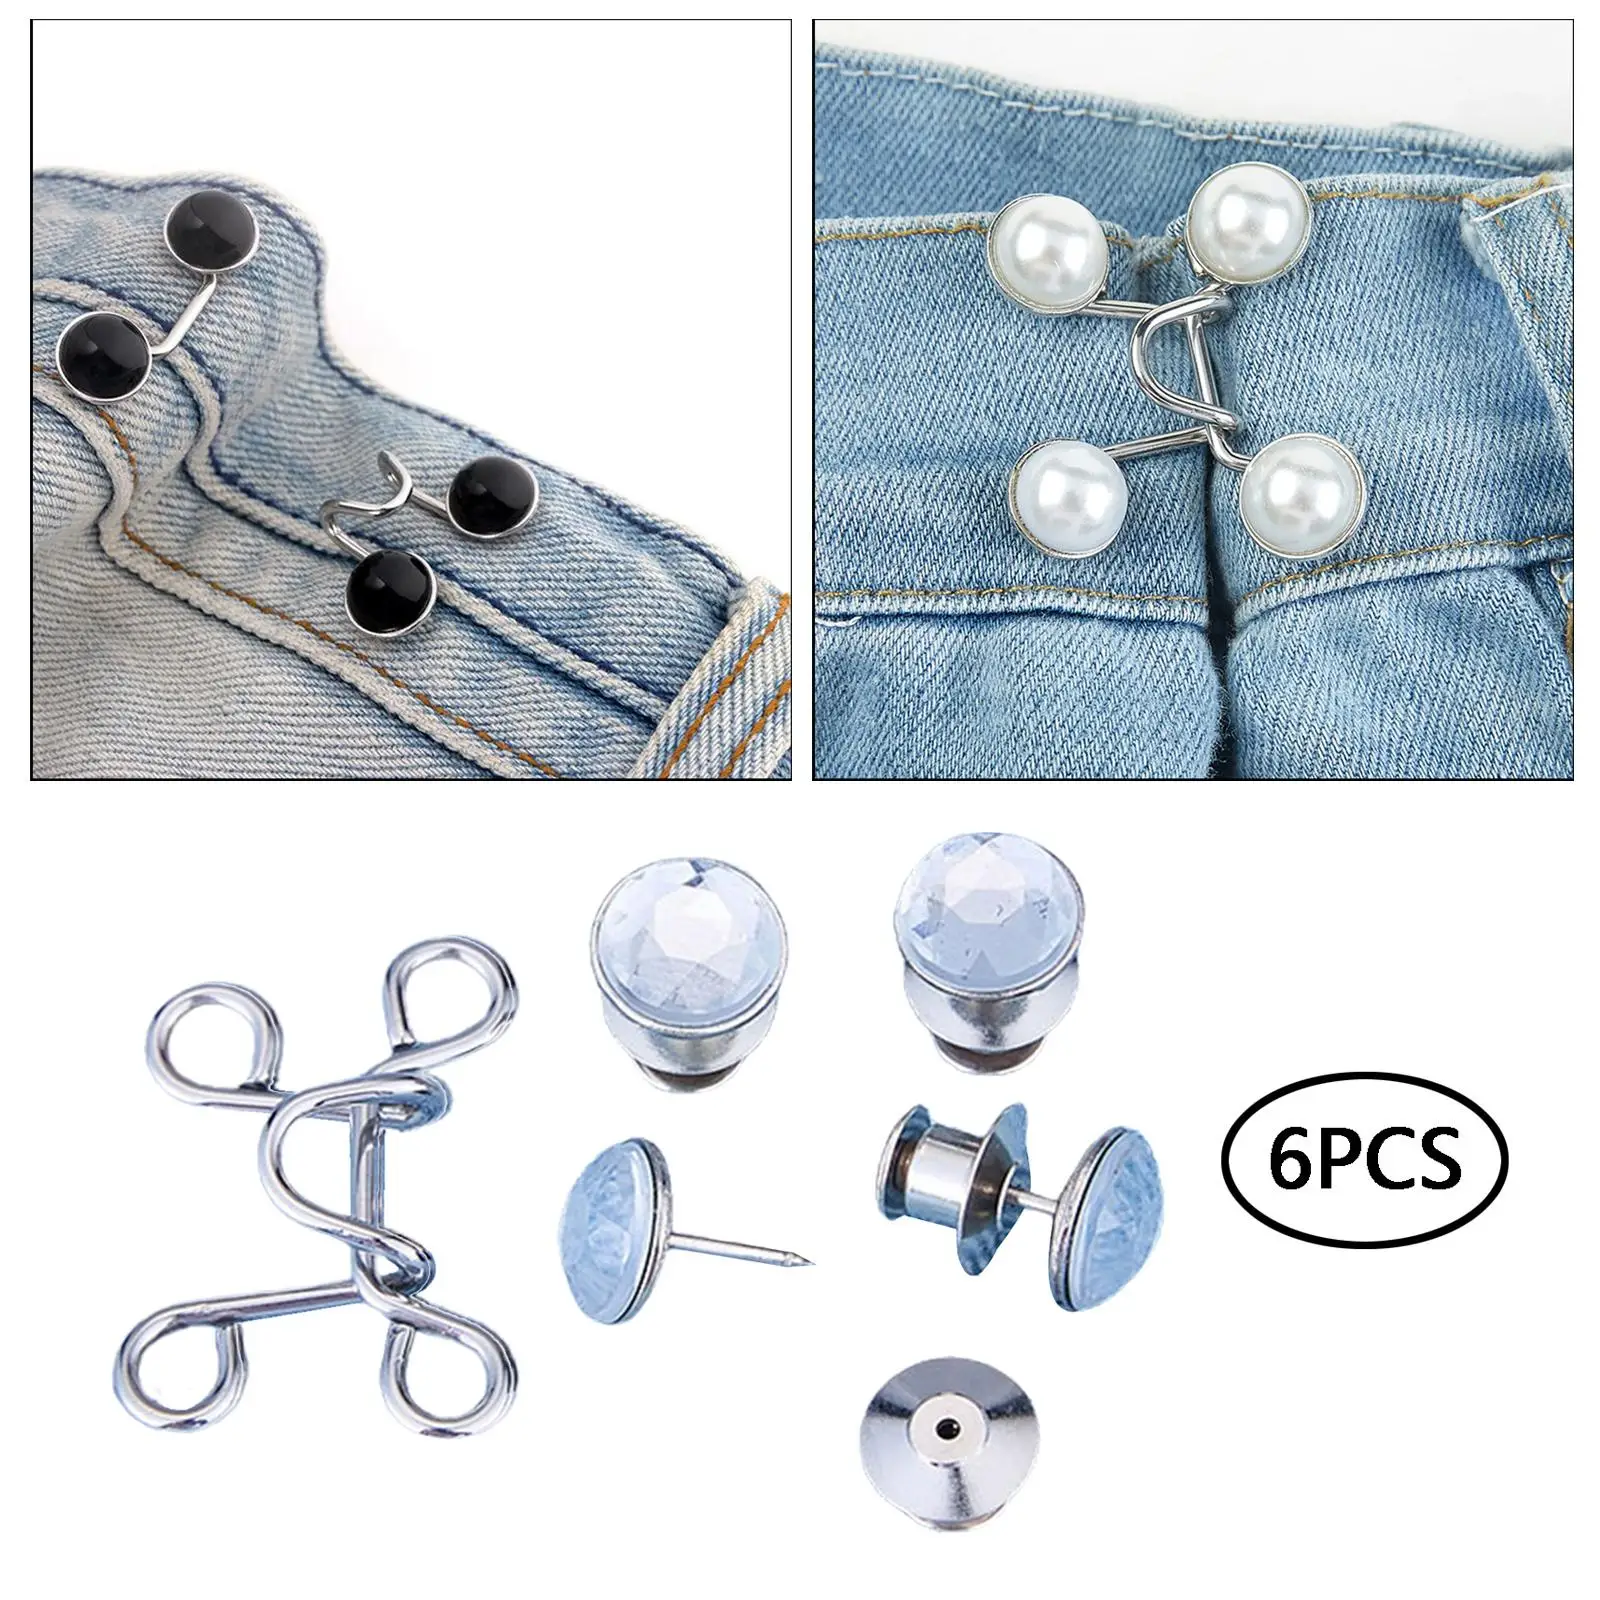 Sewing Hooks and Eyes Closure Metal Crafts Buttons  Clothing Bra Pants Jean Adjustable Waist Buckle Coats Craft Crafting 